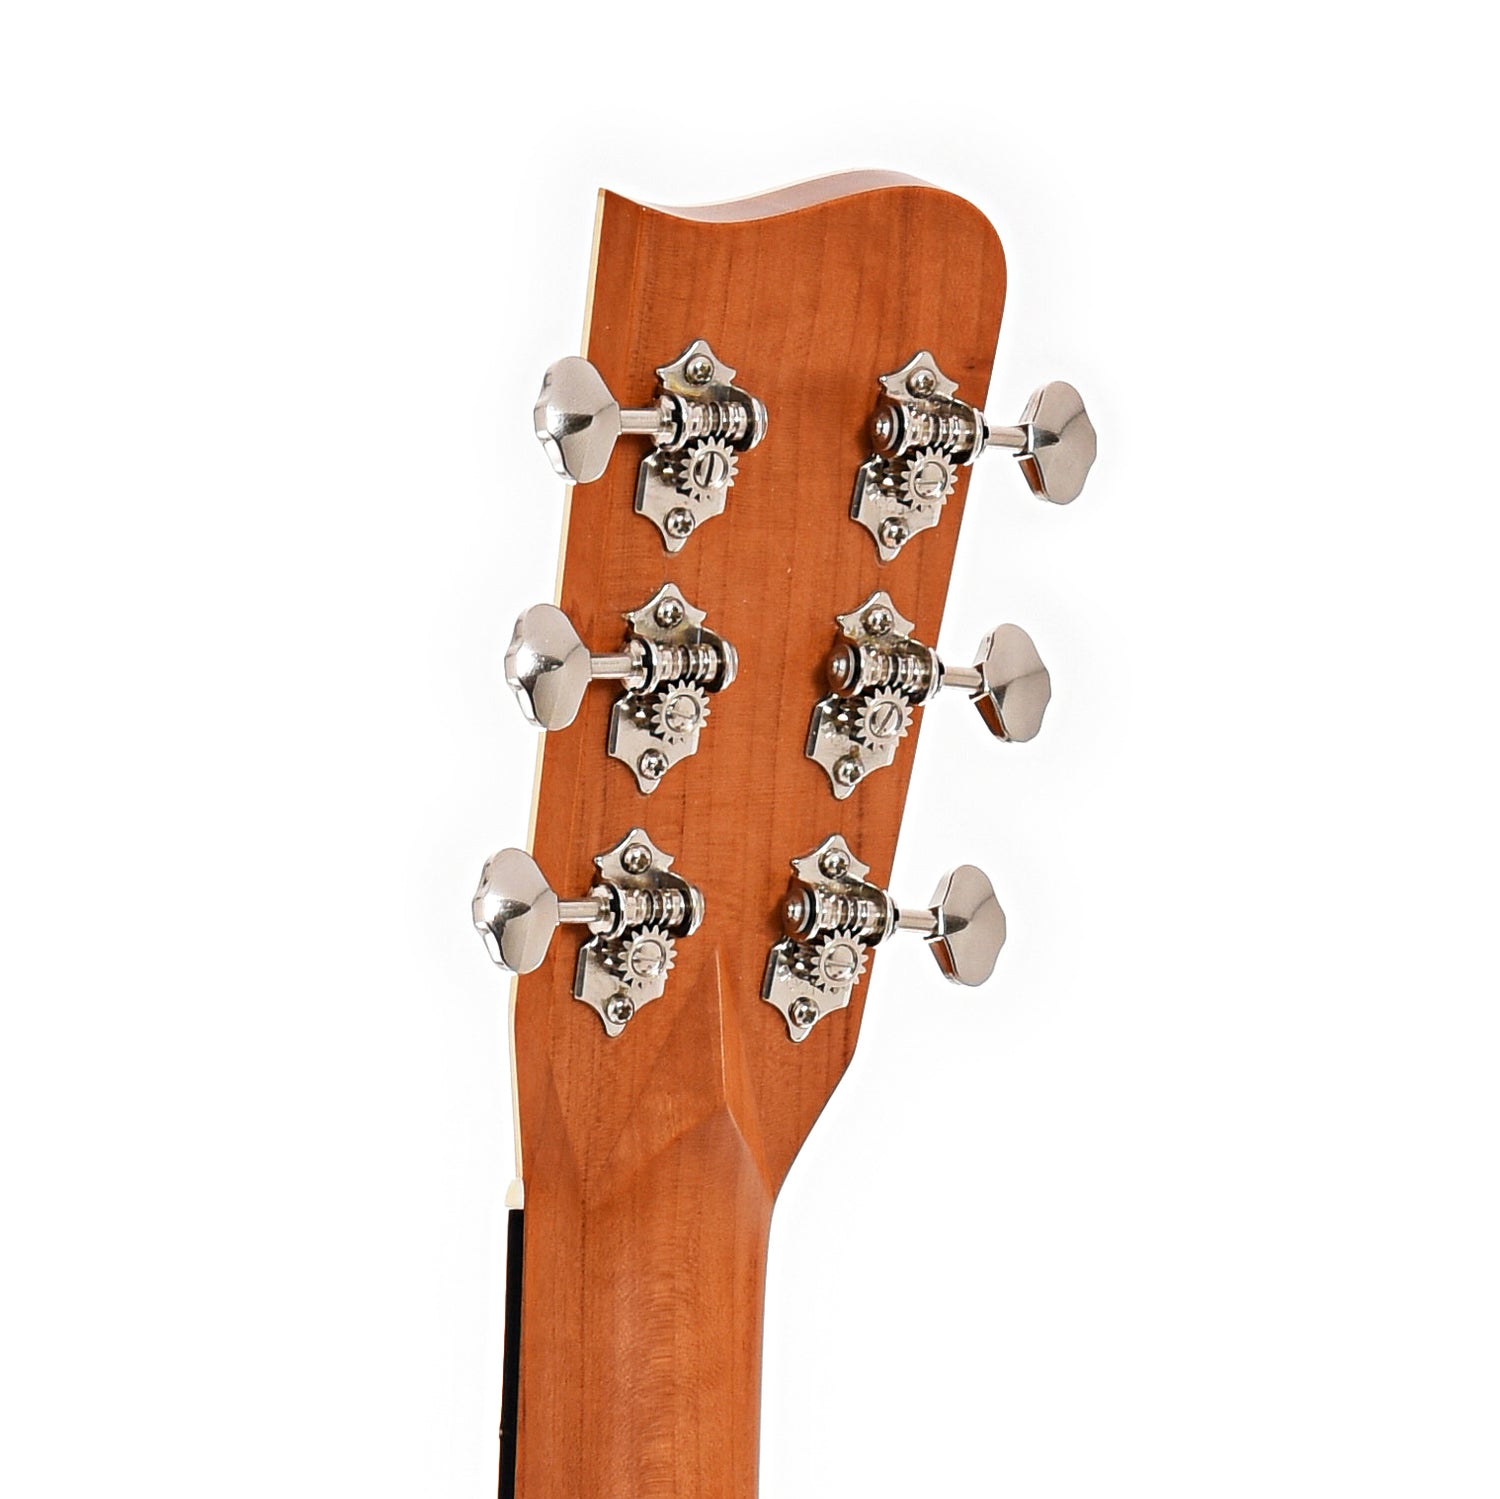 Back headstock of Gallagher Guitar Co. "The Founder's Guitar" P-50 Cherry Parlor 